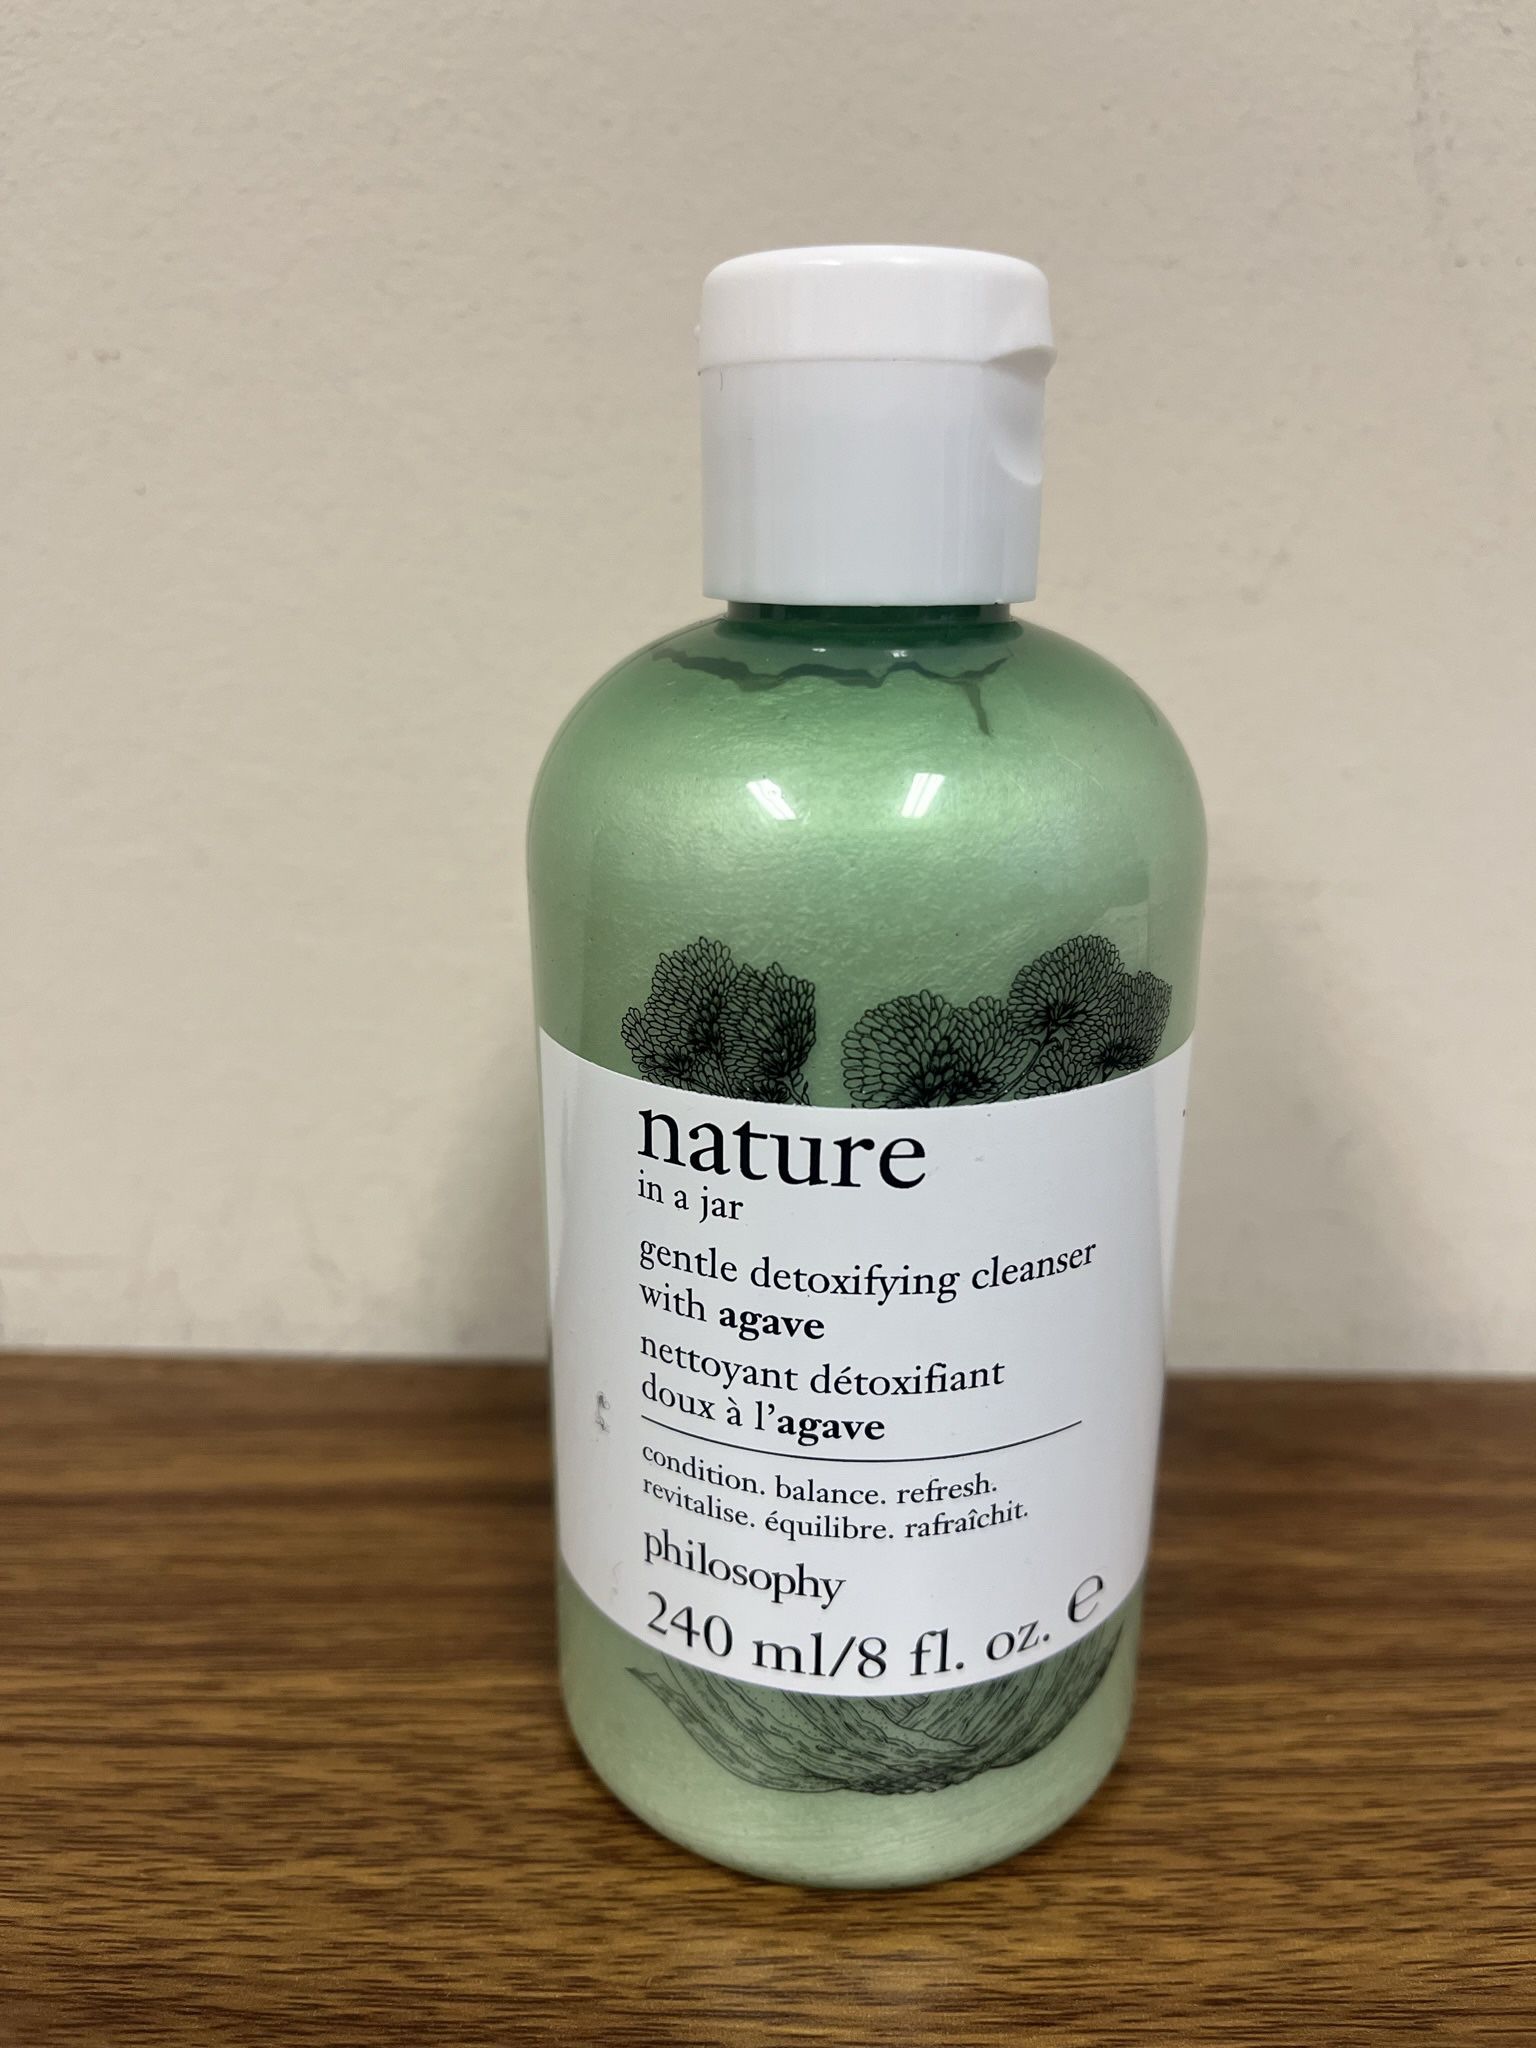 Nature in a jar cleanser for sale